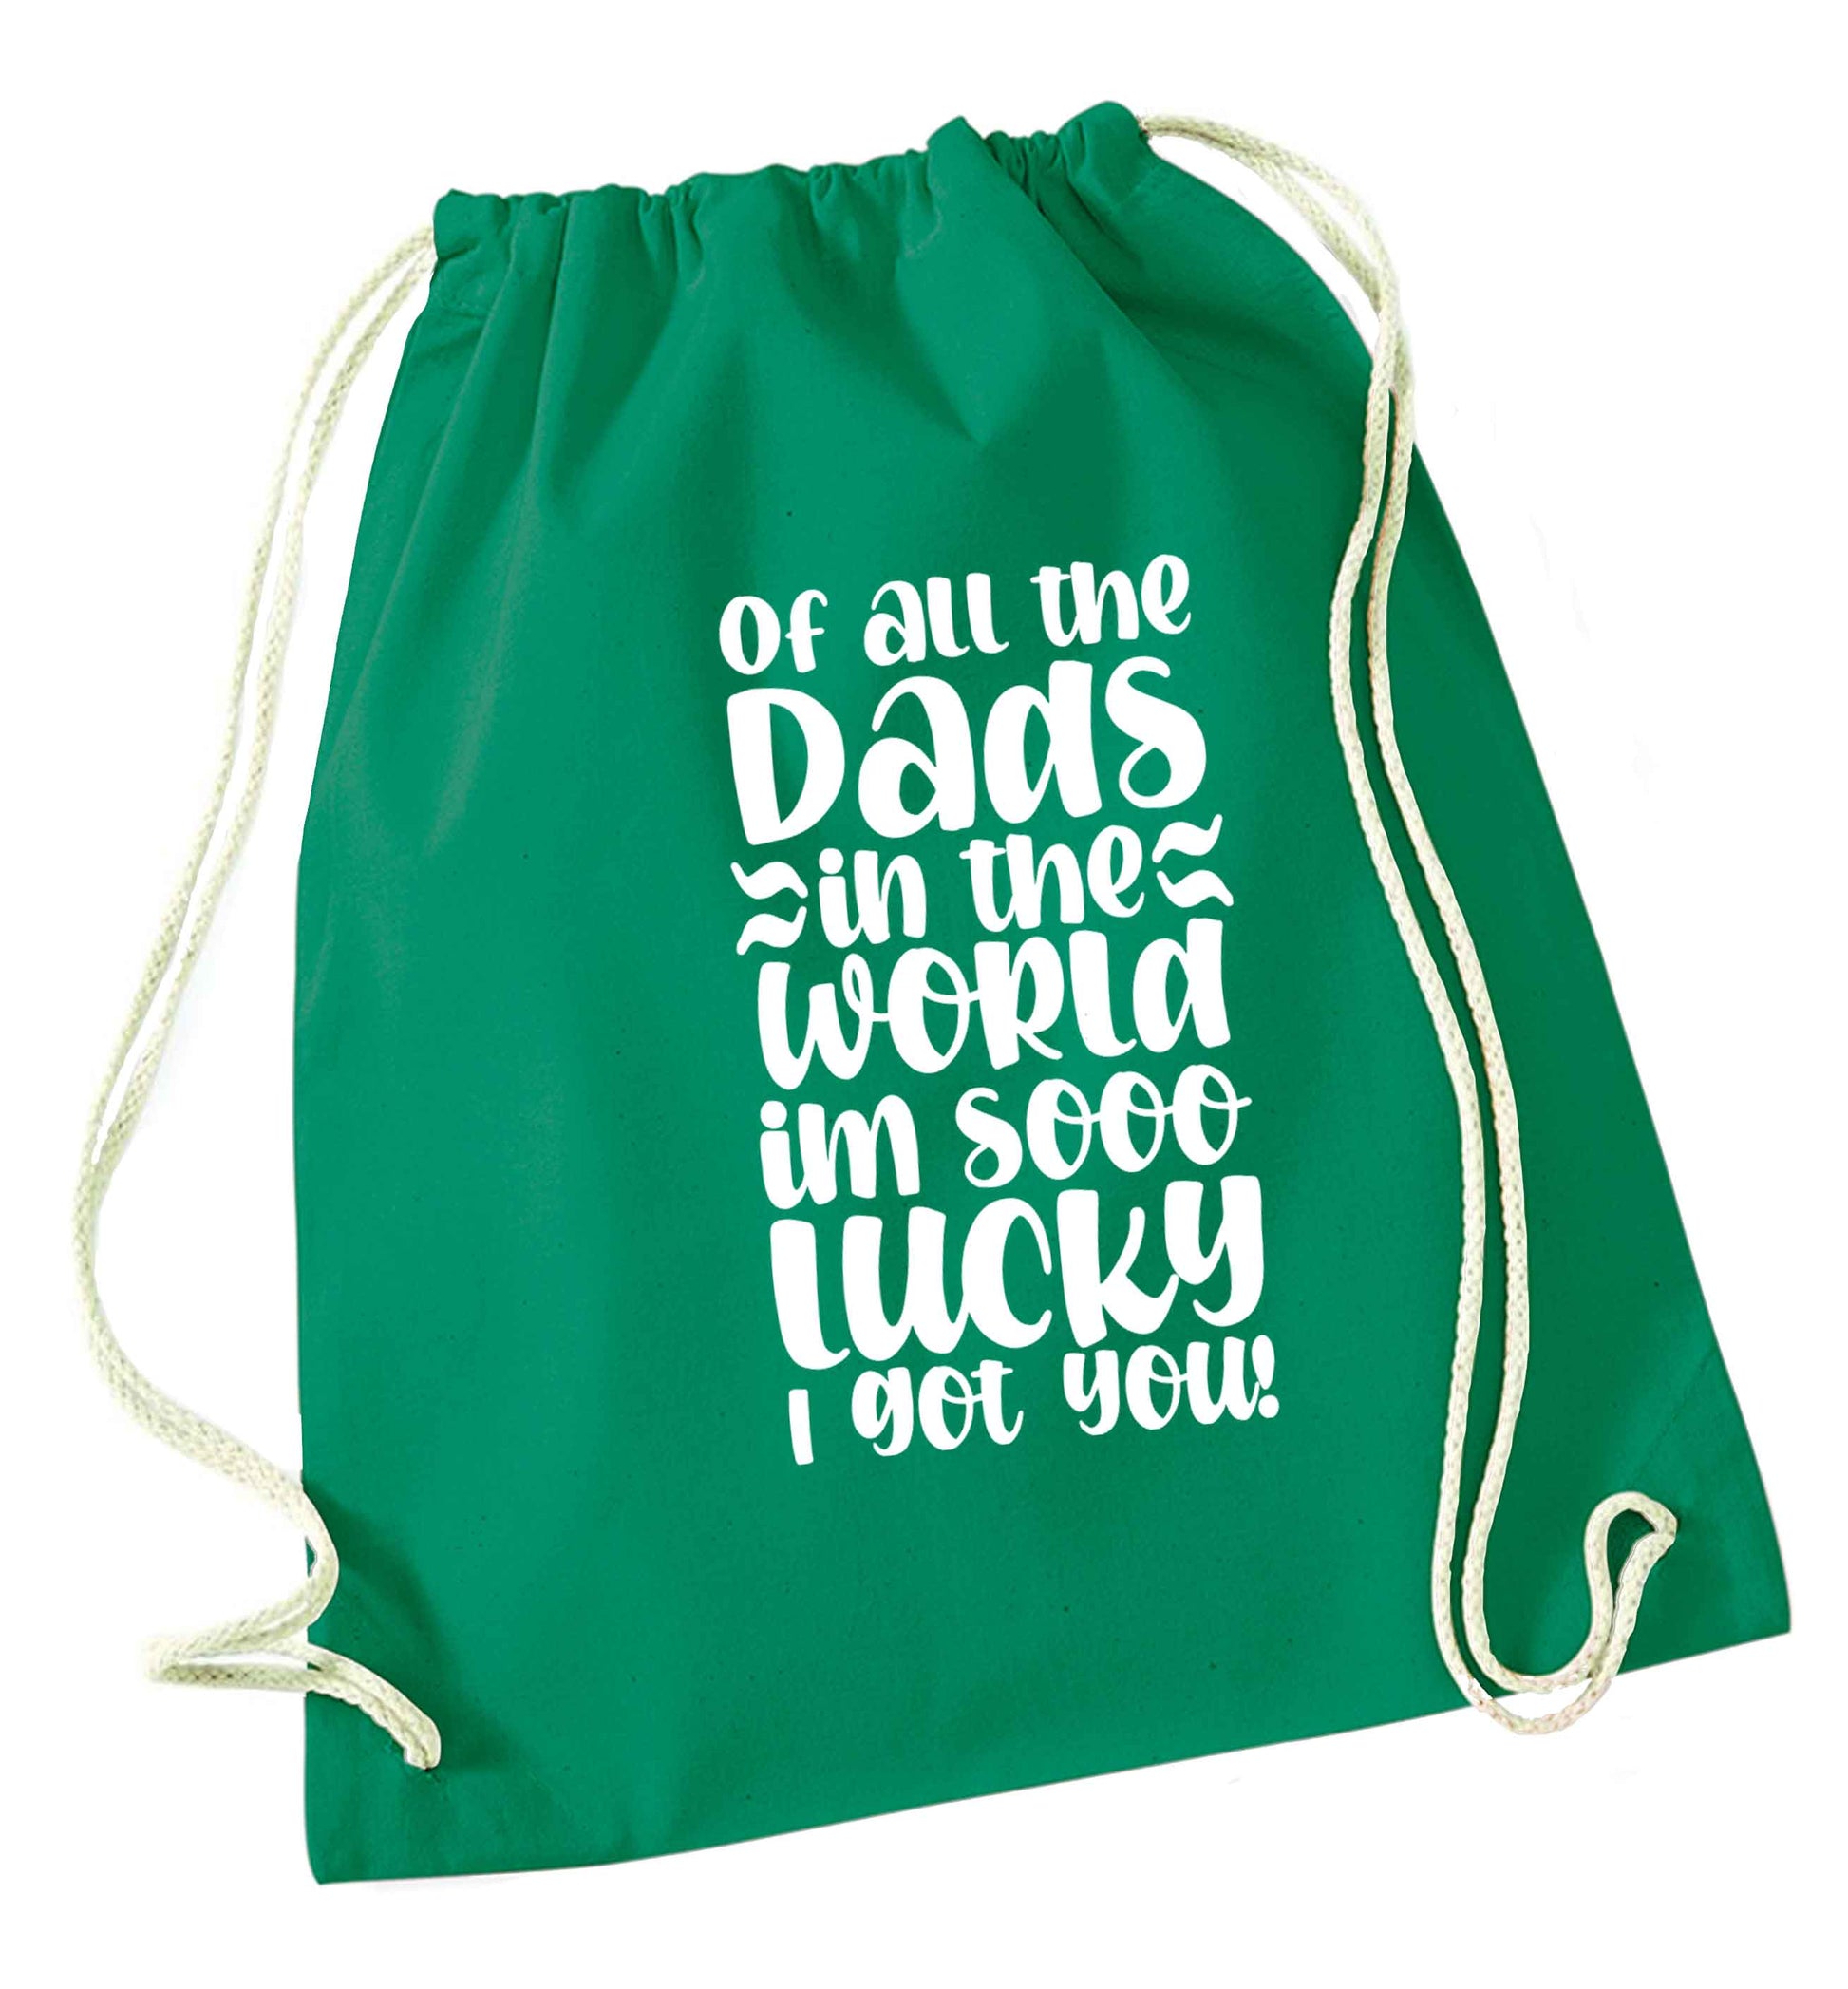 Of all the Dads in the world I'm so lucky I got you green drawstring bag